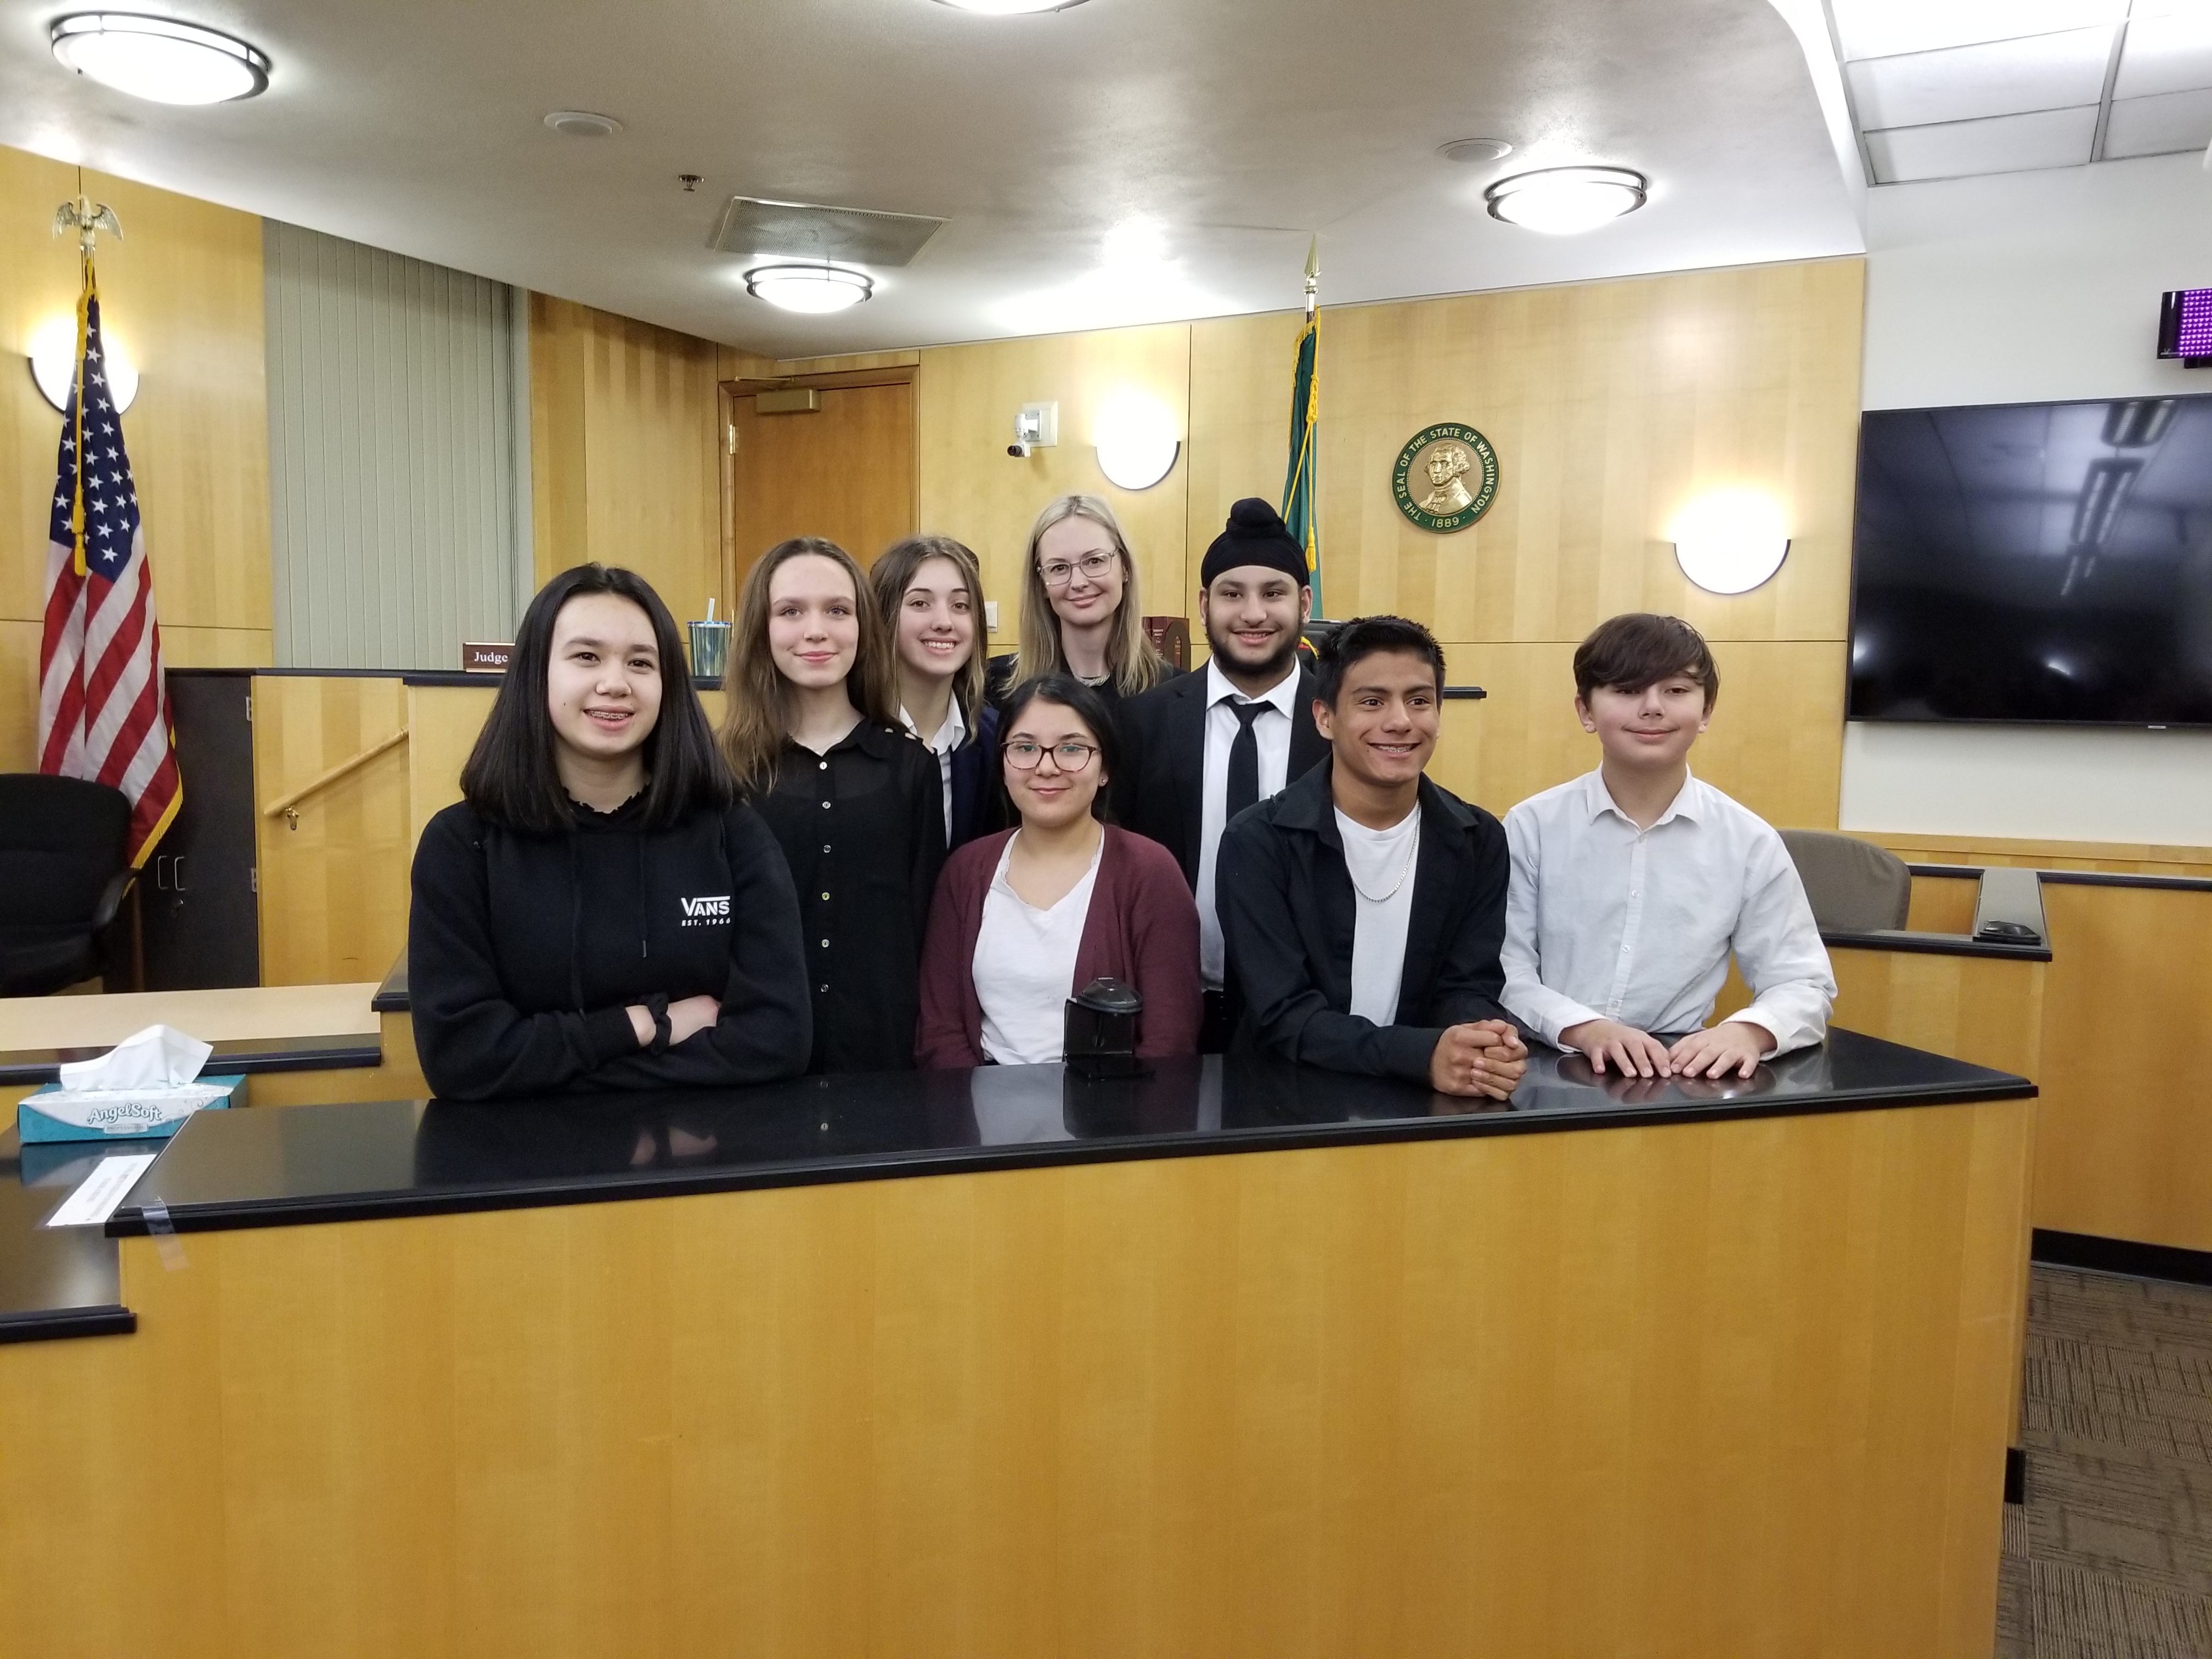 A photo of a group of students in a mock trial